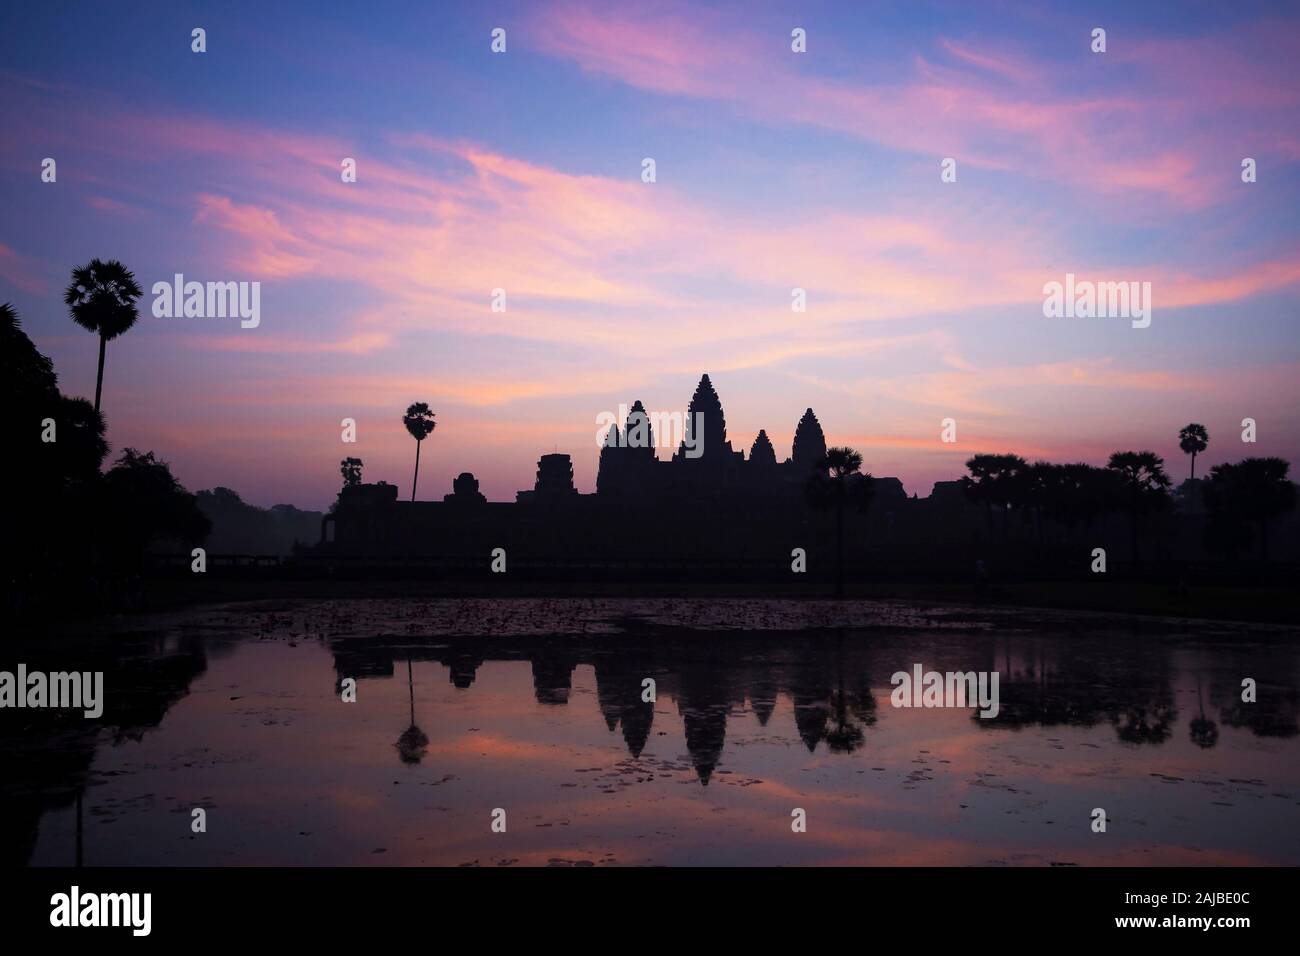 Angkor Wat temple at sunrise in Siem Reap, Cambodia. Stock Photo